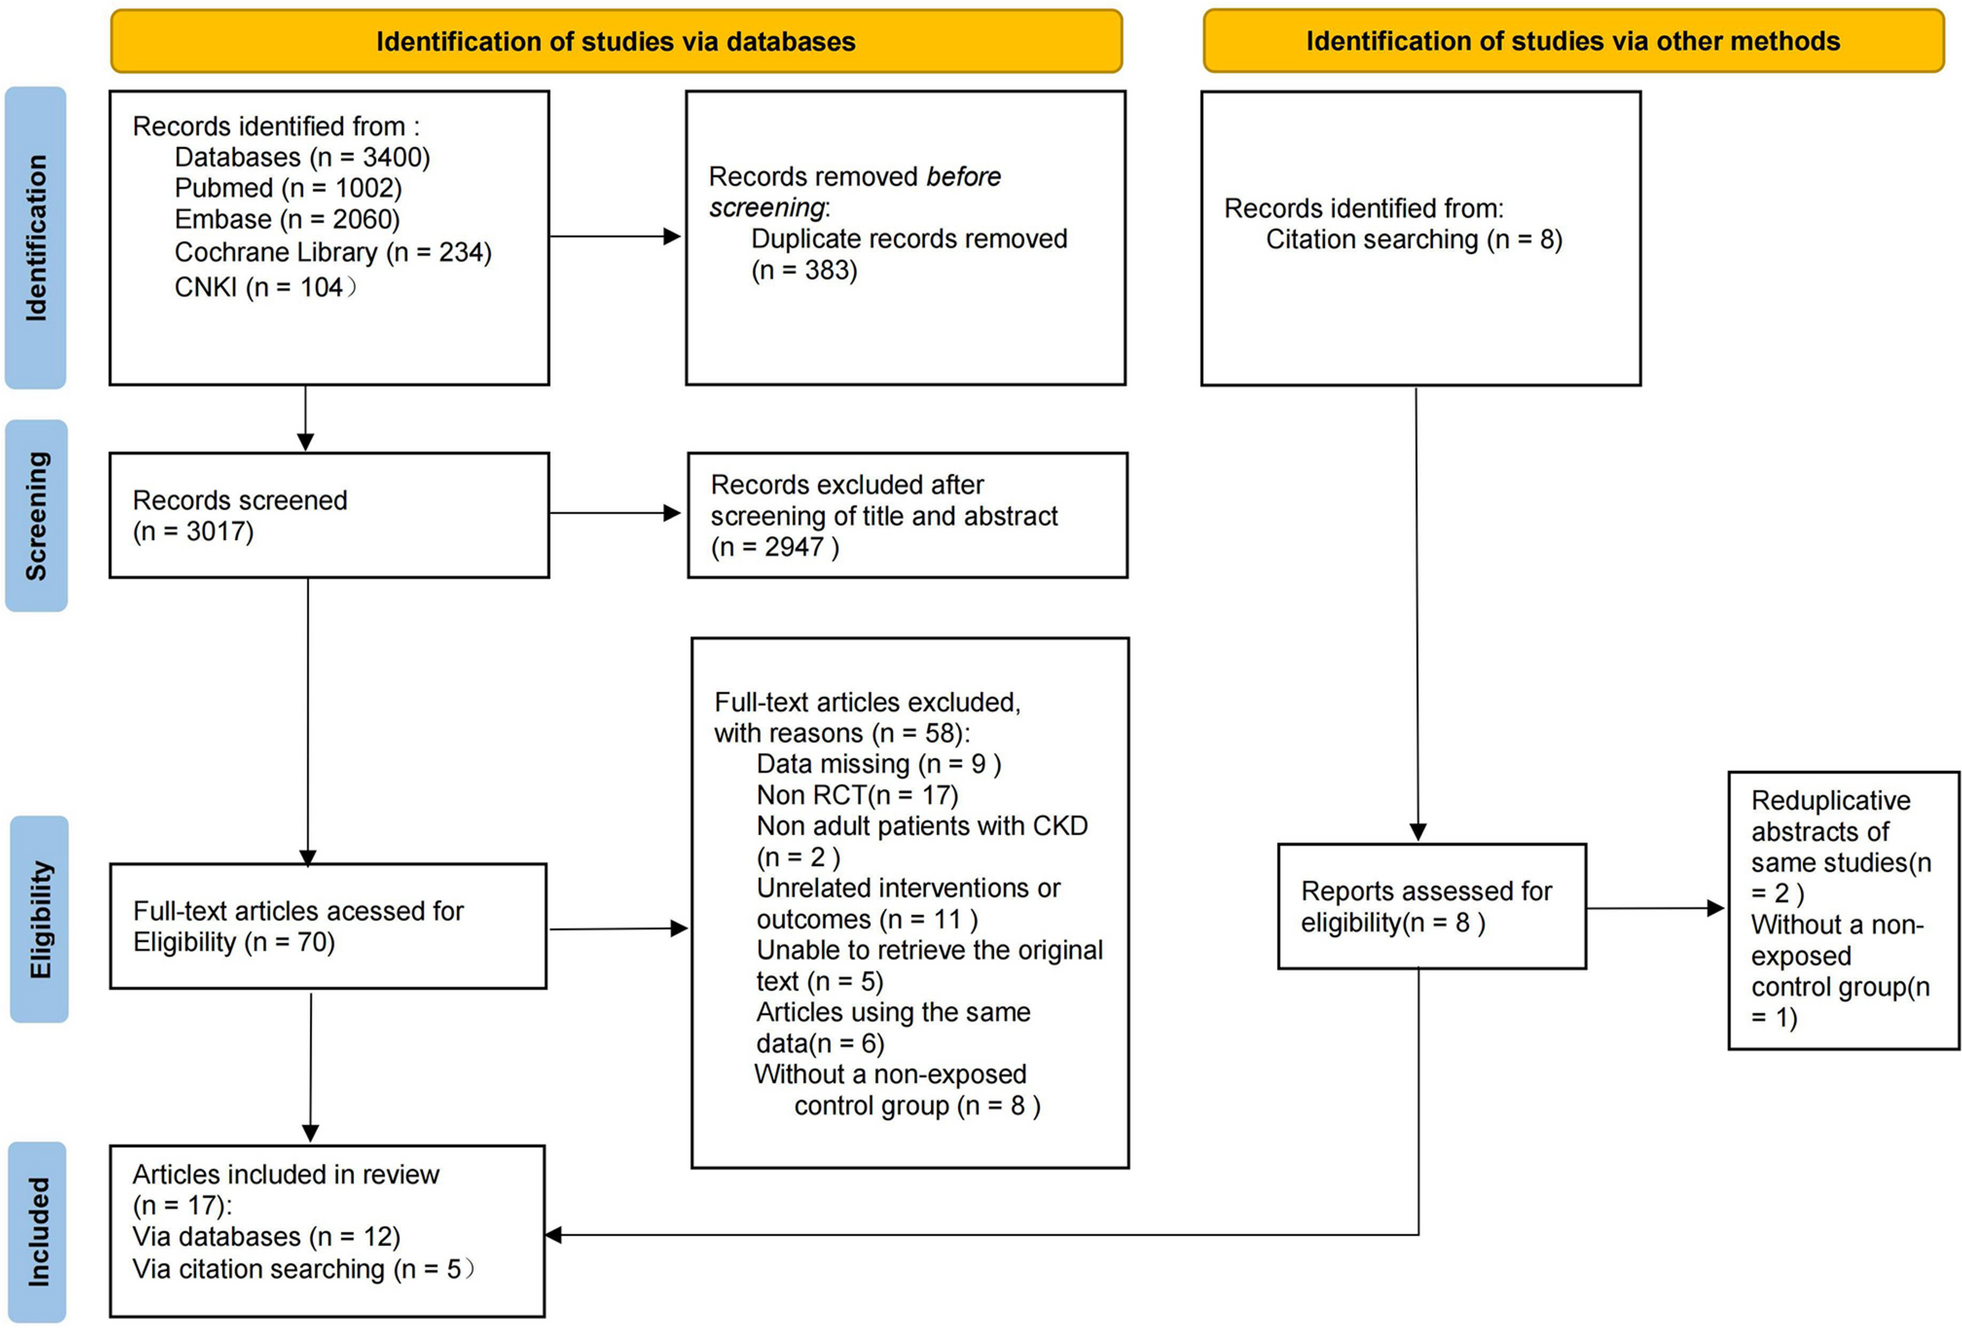 Effects of uric acid-lowering therapy (ULT) on renal outcomes in CKD patients with asymptomatic hyperuricemia: a systematic review and meta-analysis